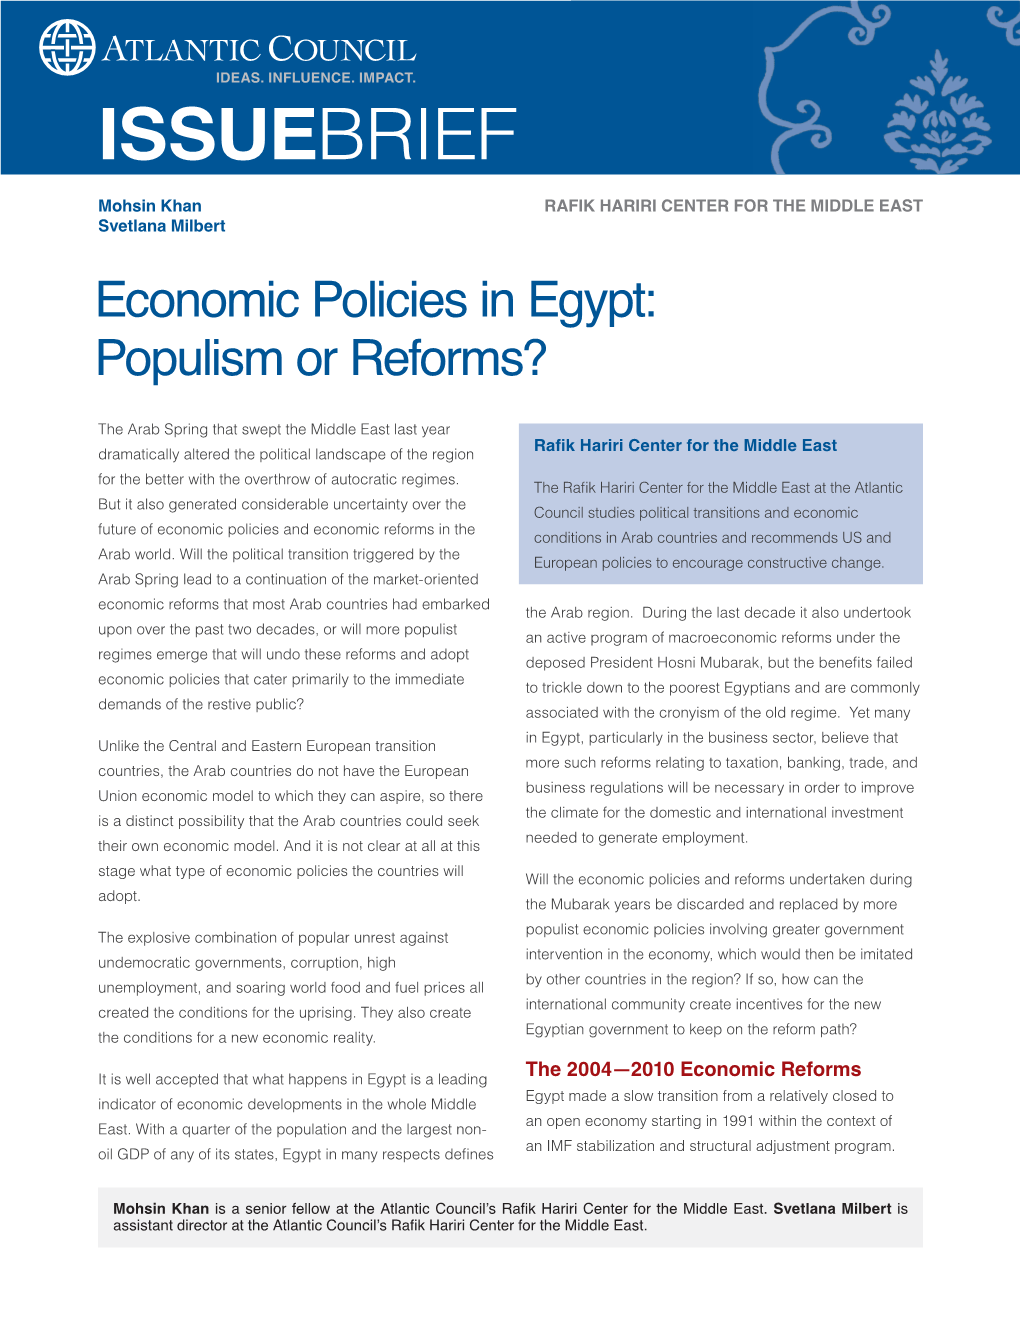 Economic Policies in Egypt: Populism Or Reforms?